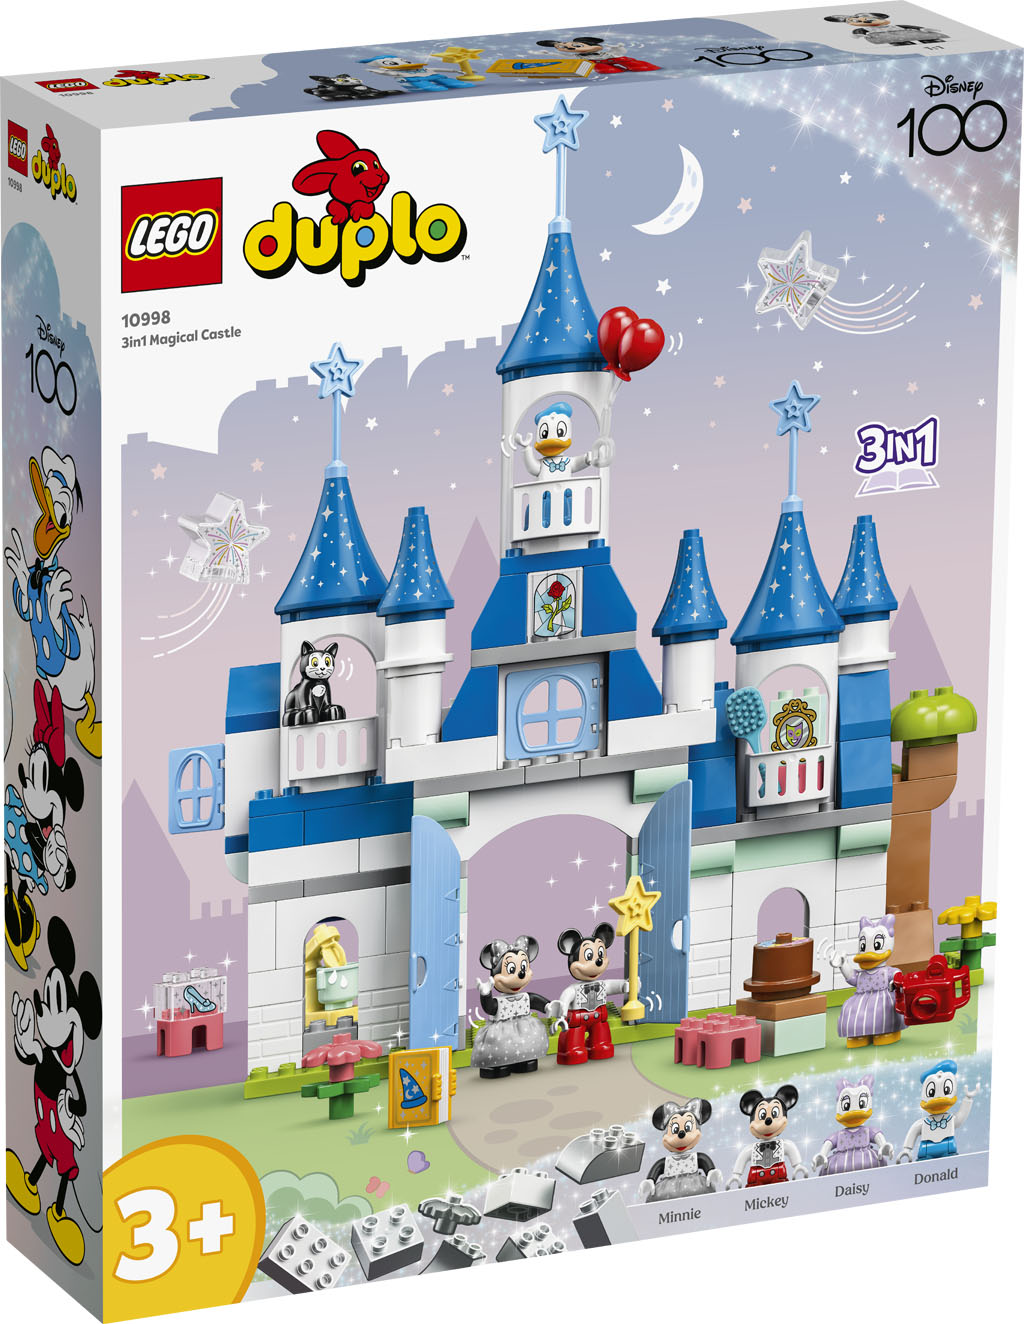 Two New LEGO Disney 100 Sets Revealed, Available from June 1st